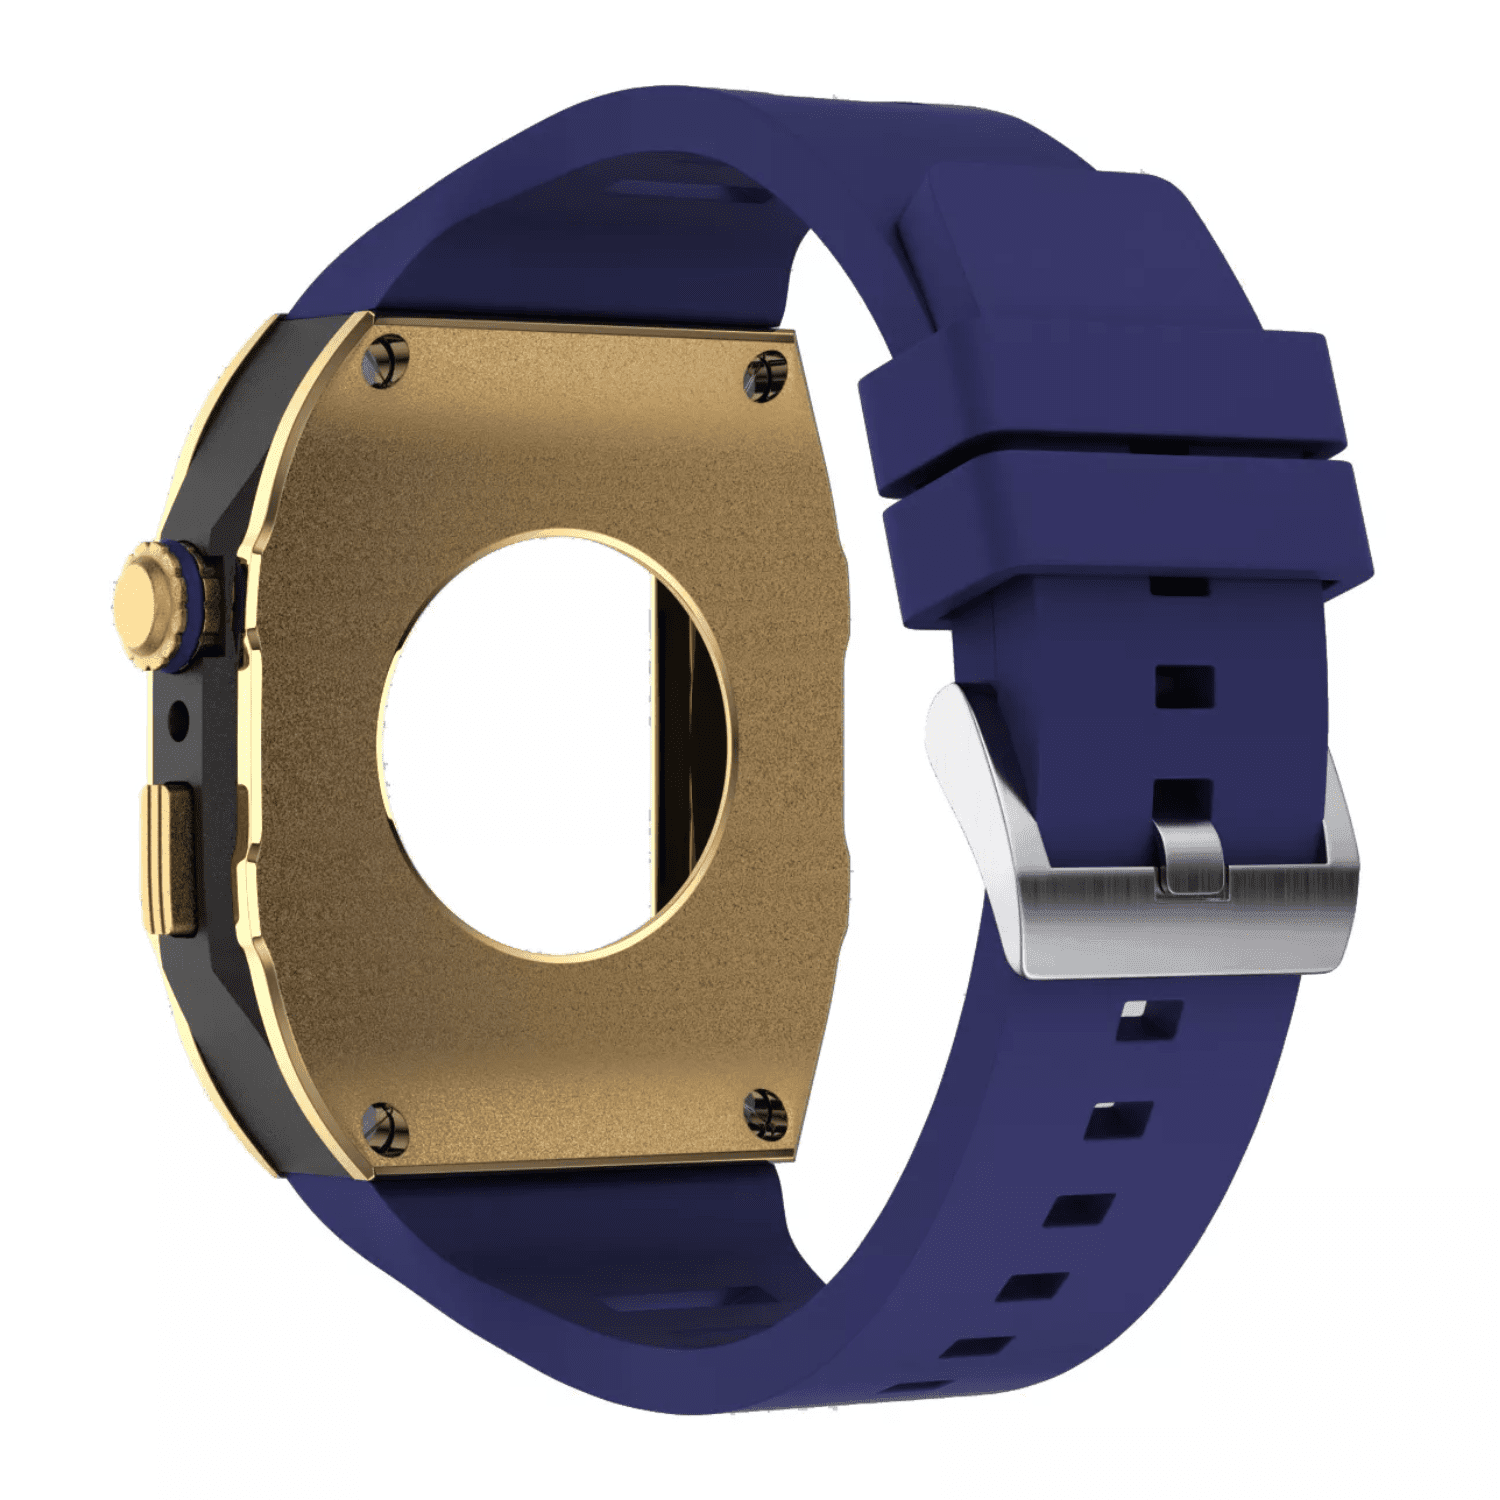 Golden Concept Style Case and Strap for Apple Watch | Luxury & Sporty Apple Watch Case & Fashion Accessory | Mod Kit Replacement for Apple Watch Series SE/3/4/5/67/8 44 mm| Golden Case - Blue Band mod kits india dream watches apple watch